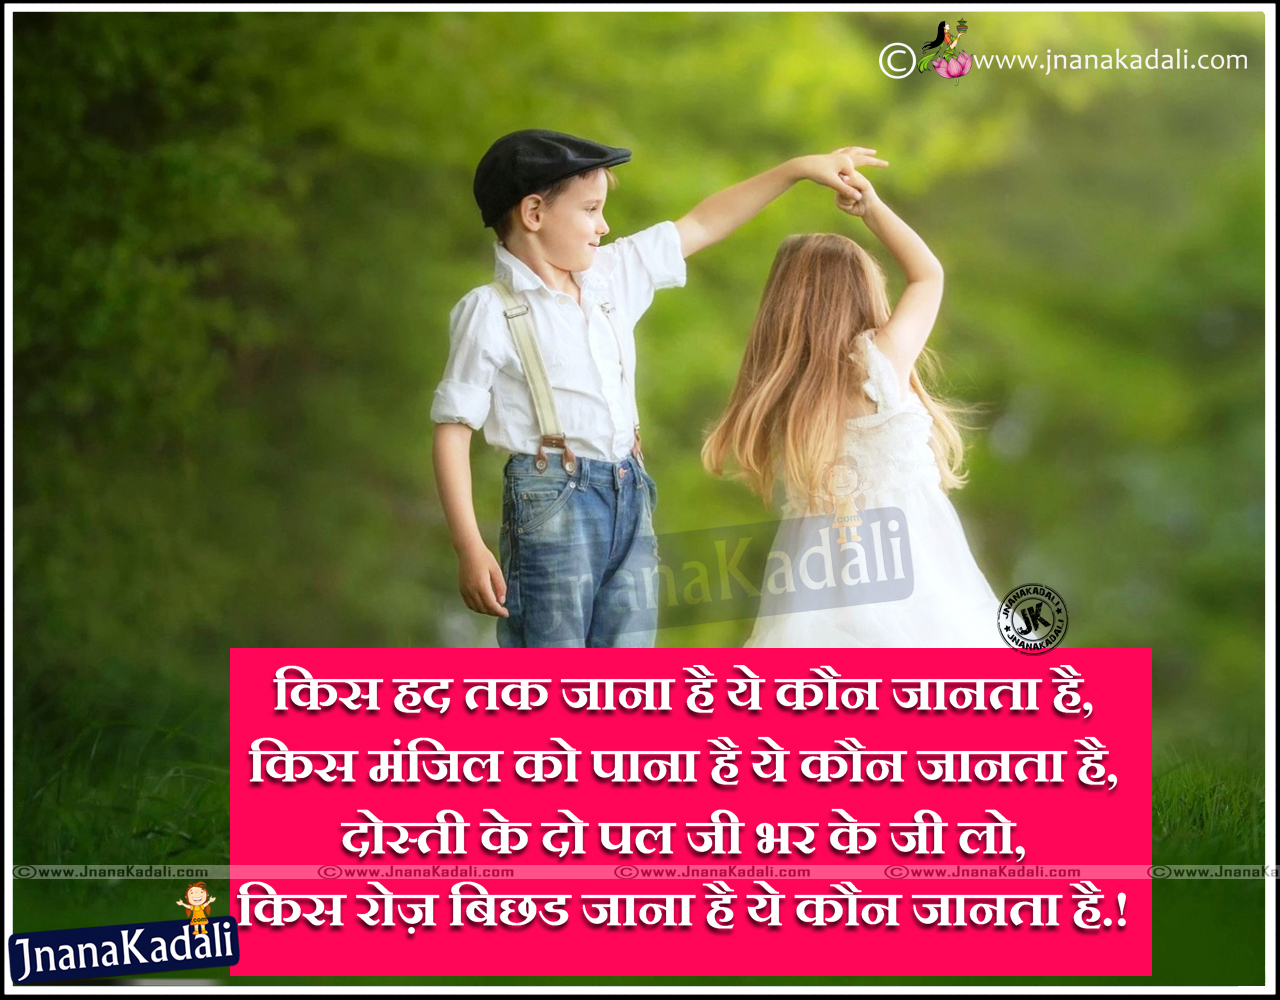 Best Hindi Loyal Friendship Quotes &Nice Sayings Pictures | JNANA ...